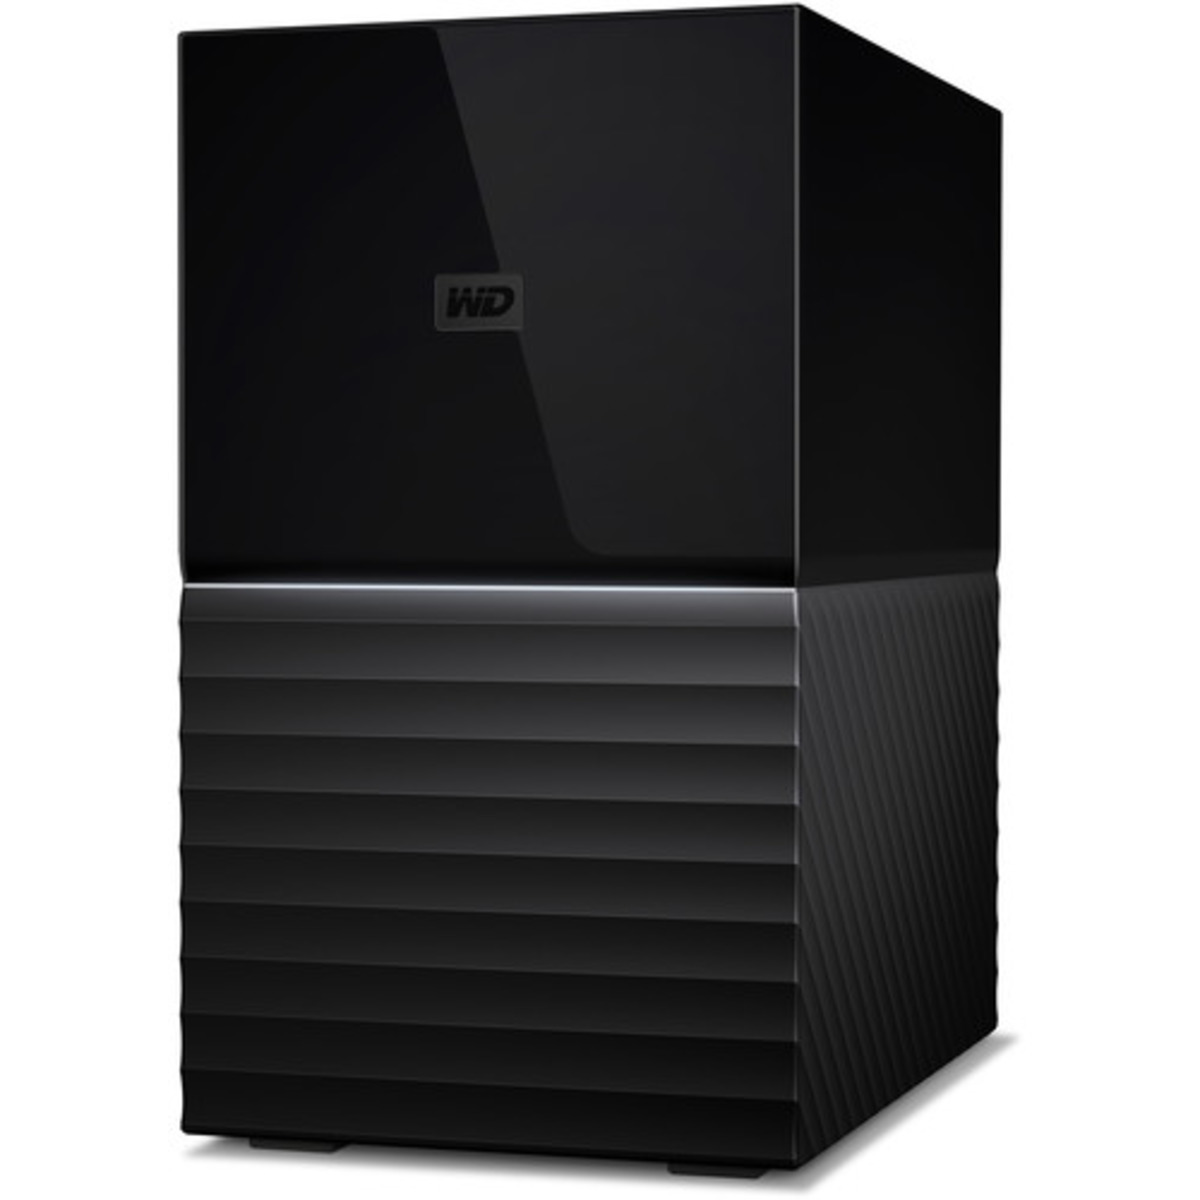 buy $603 Western Digital My Book DUO Gen 2 12tb Desktop DAS - Direct Attached Storage Device 2x6000gb Western Digital Red Plus WD60EFZX 3.5 5640rpm SATA 6Gb/s HDD NAS Class Drives Installed - Burn-In Tested - ON SALE - nas headquarters buy network attached storage server device das new raid-5 free shipping usa christmas new year holiday sale My Book DUO Gen 2